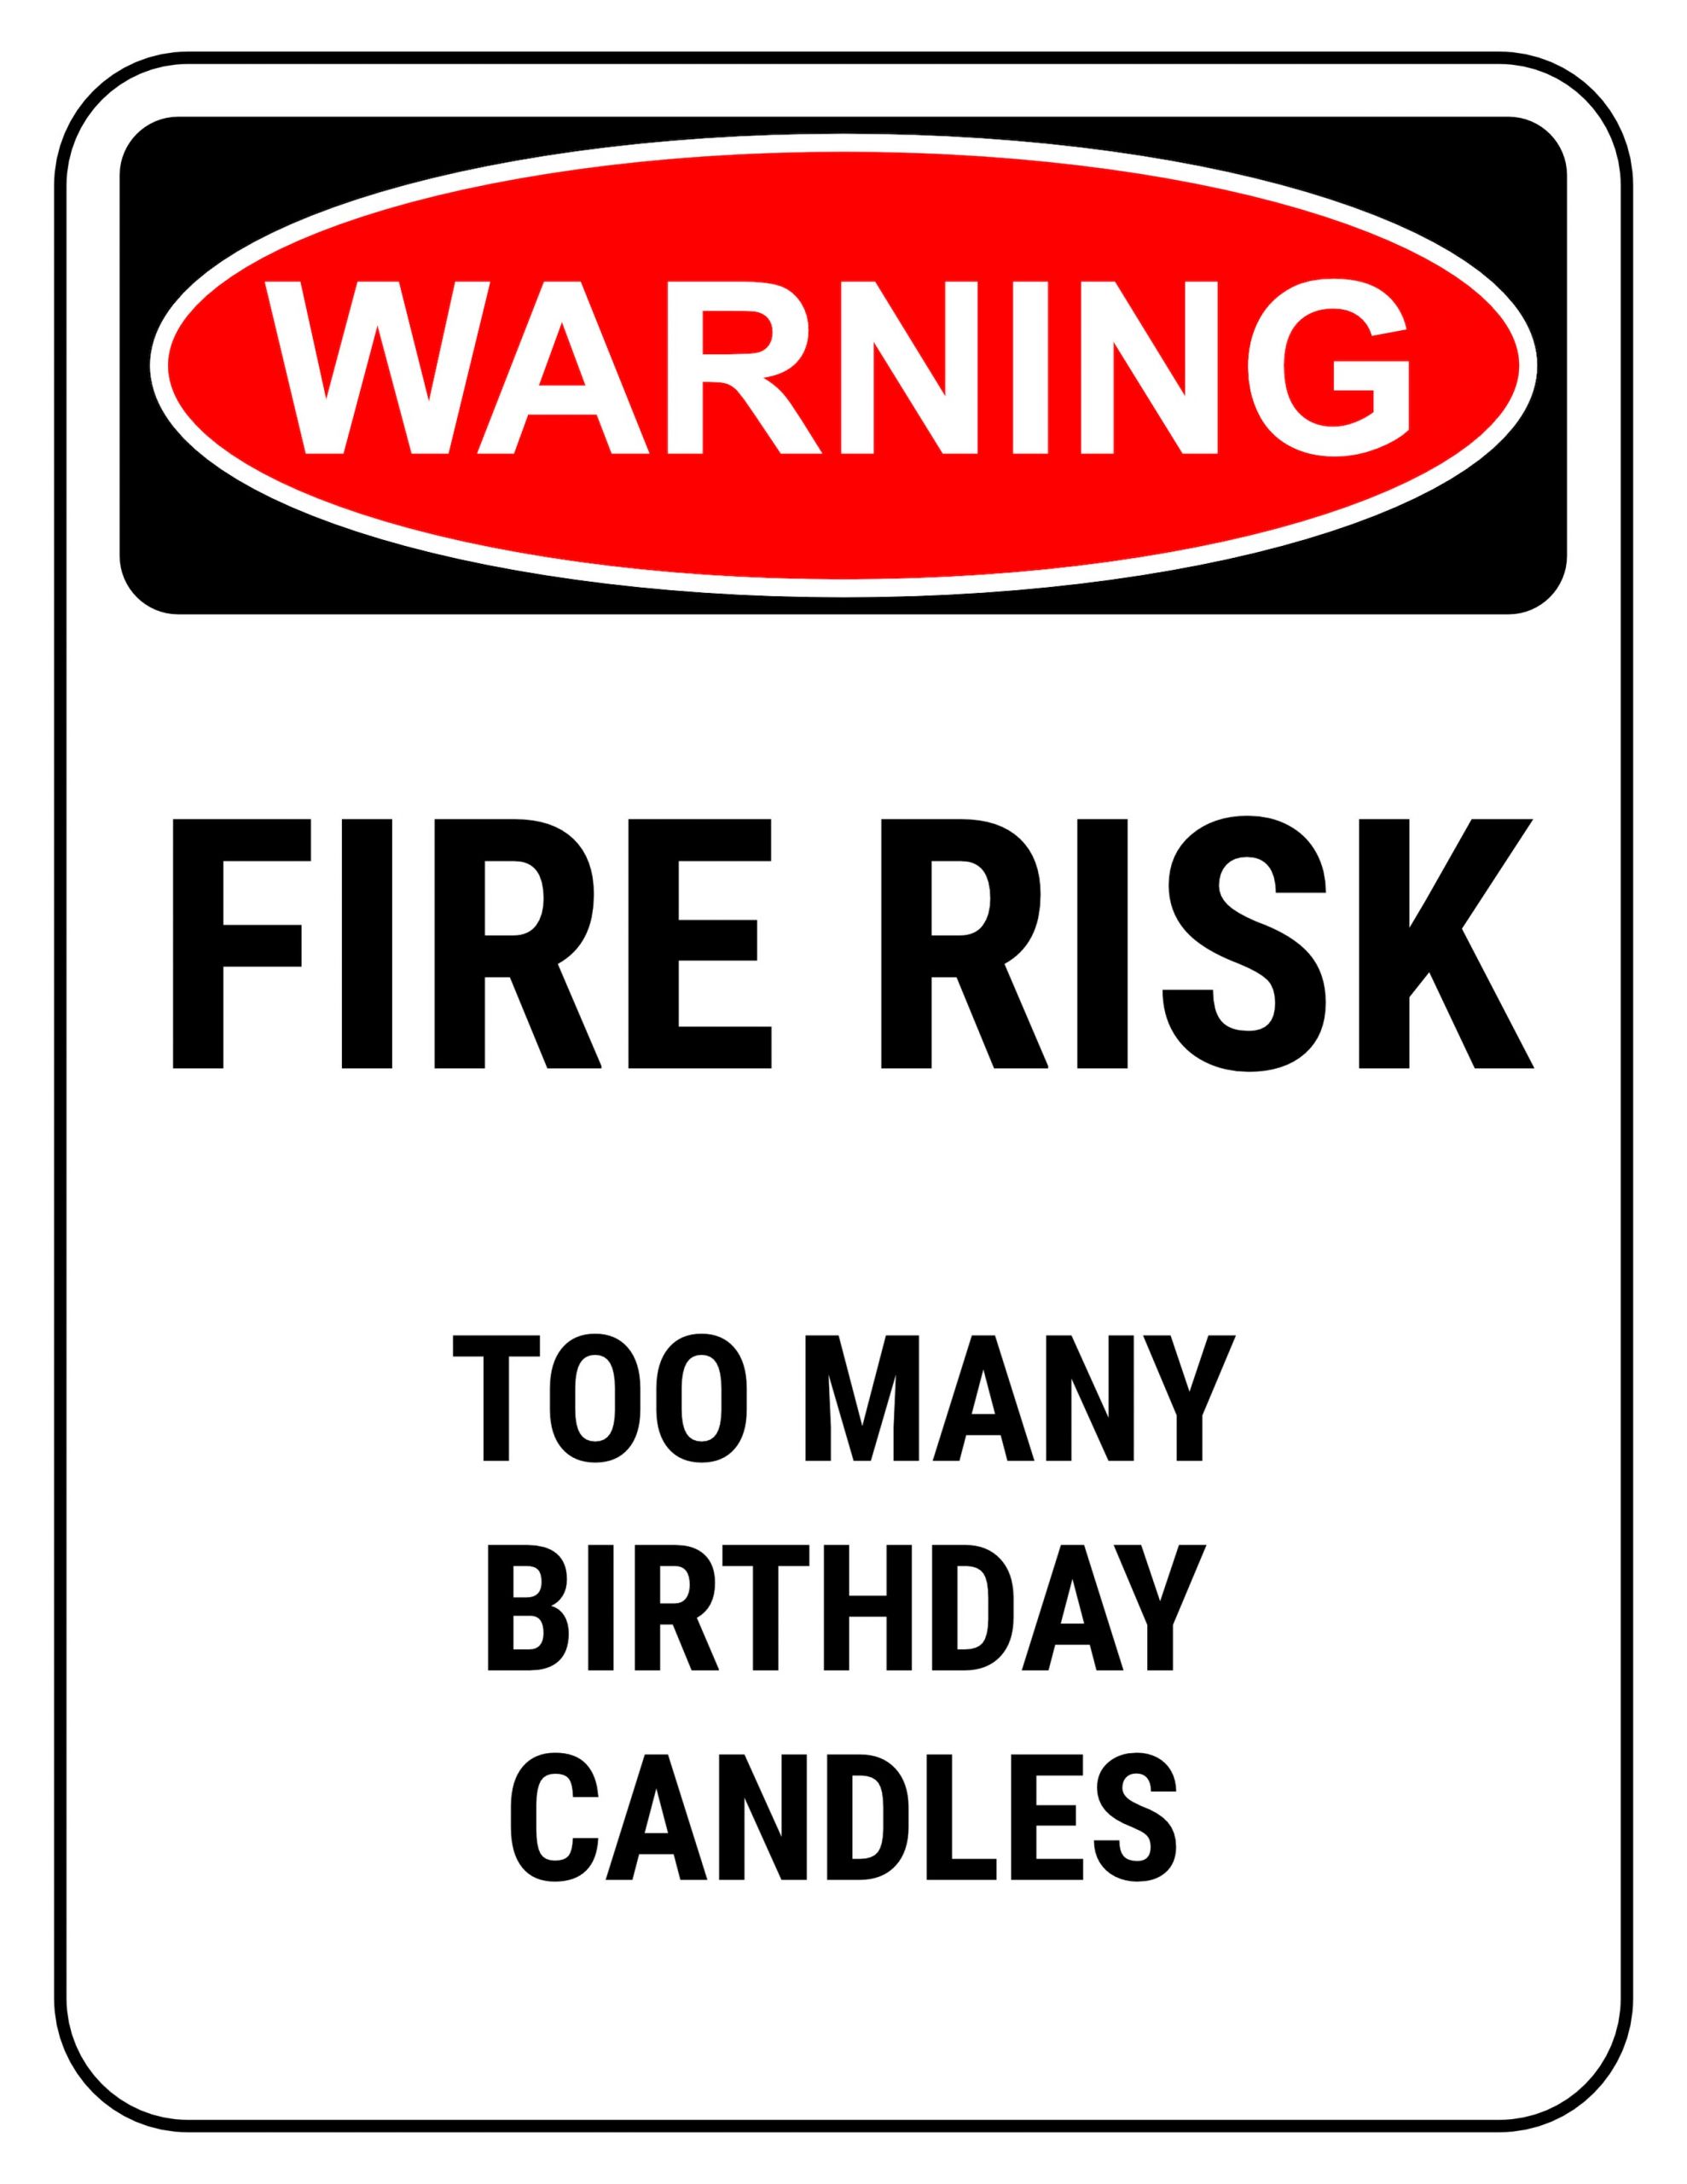 Funny Happy Birthday Signs
 Funny Safety Signs to Download and Print